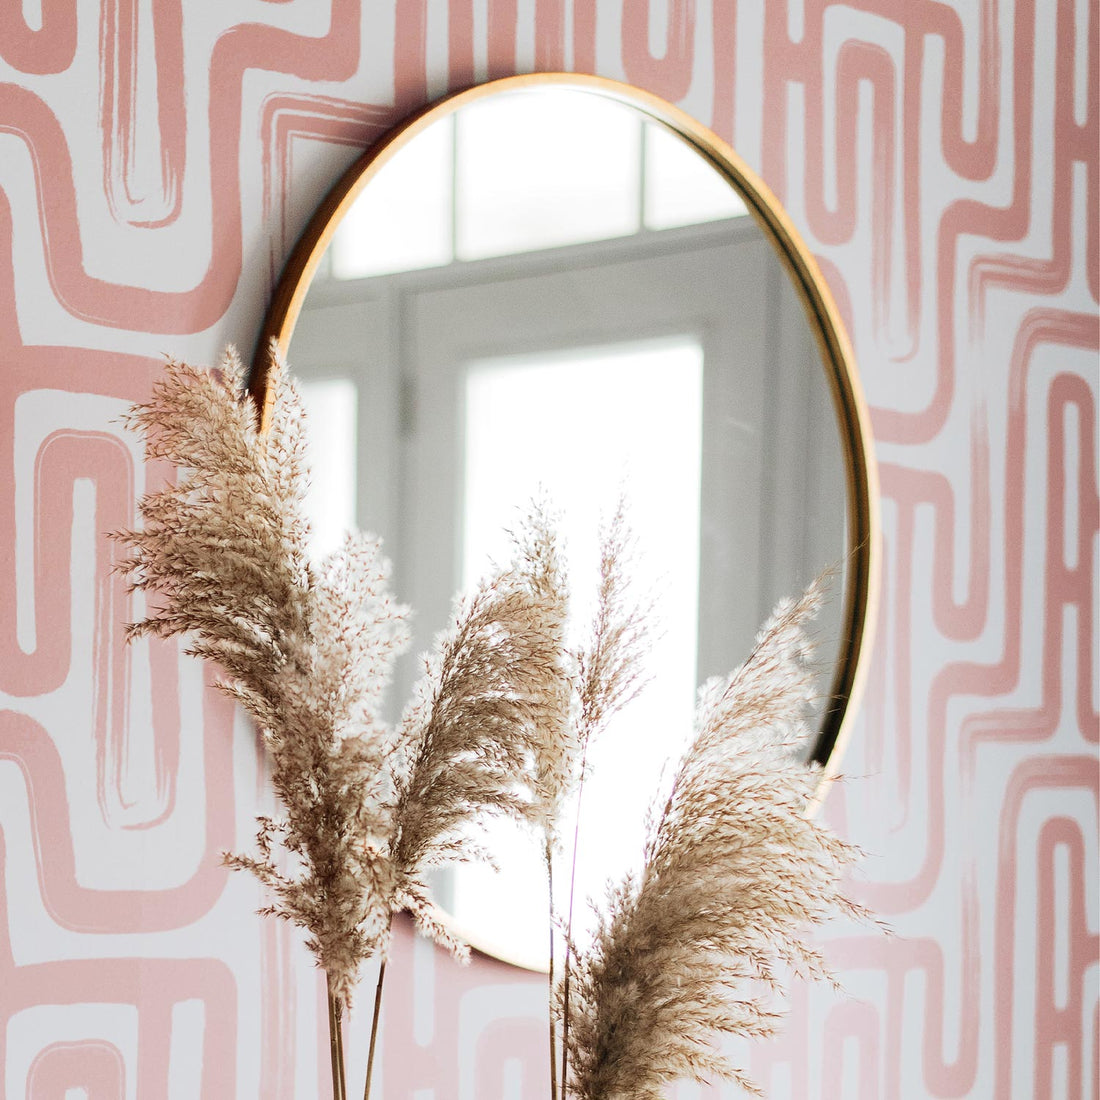 pink line wallpaper for home interior